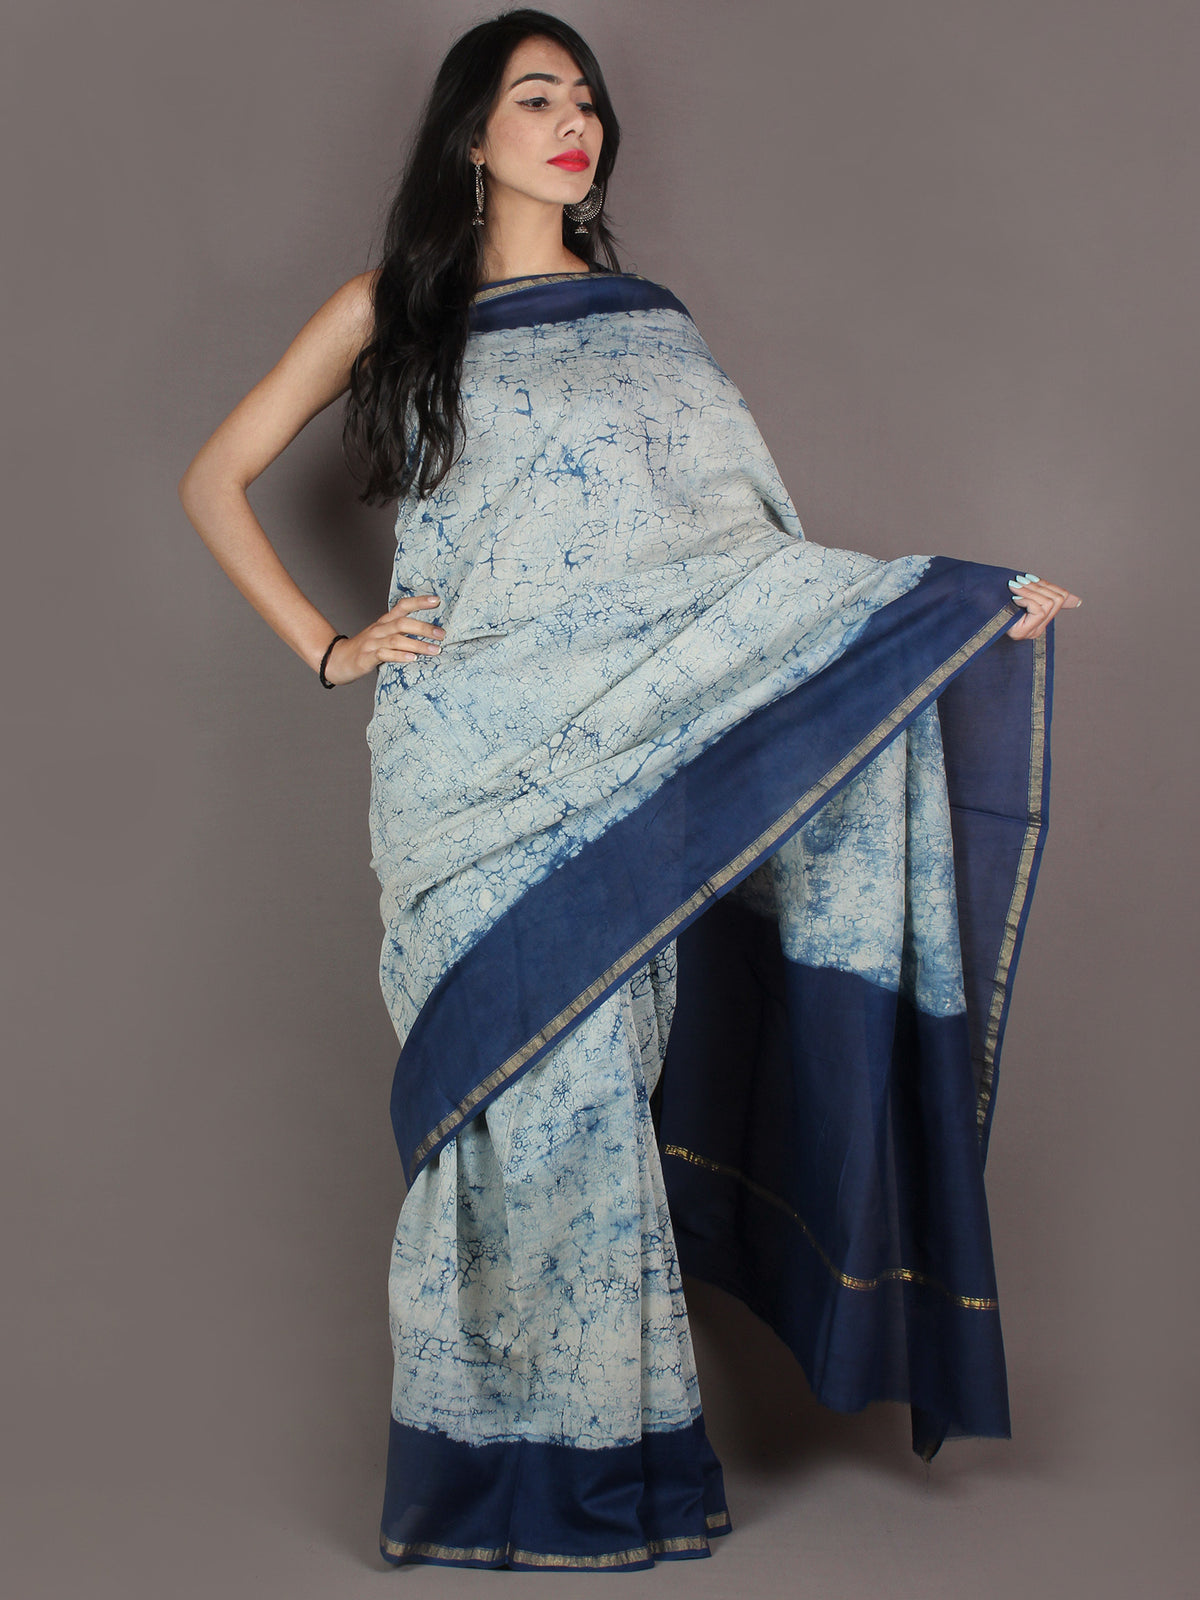 Indigo Blue Ivory Hand Block Painted in Natural Colors Chanderi Saree - S03170978